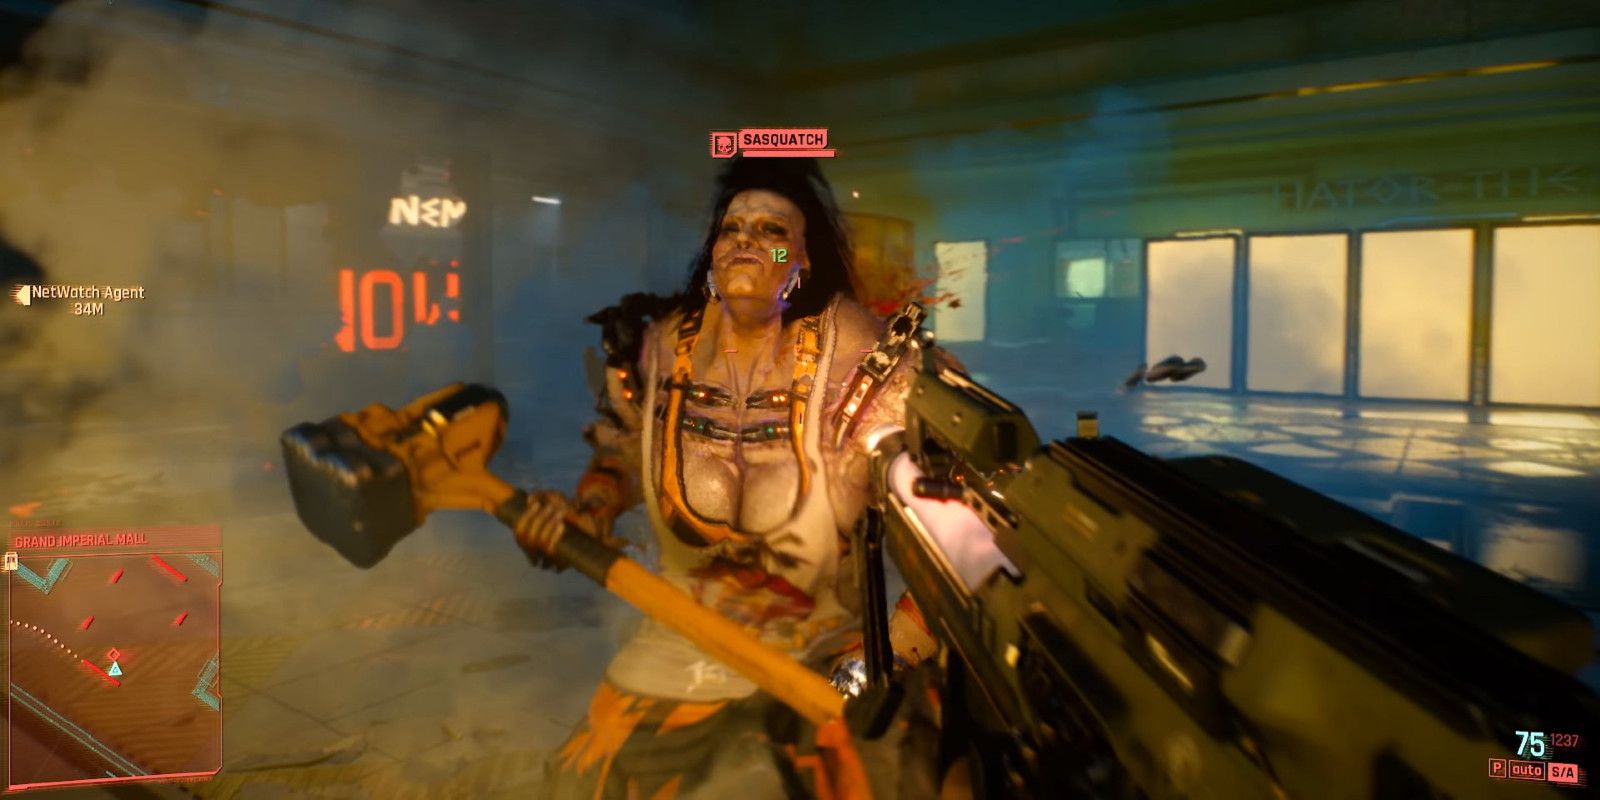 Someone holding a gun towards the character Sasquatch in Cyberpunk 2077 from a first-person perspective.